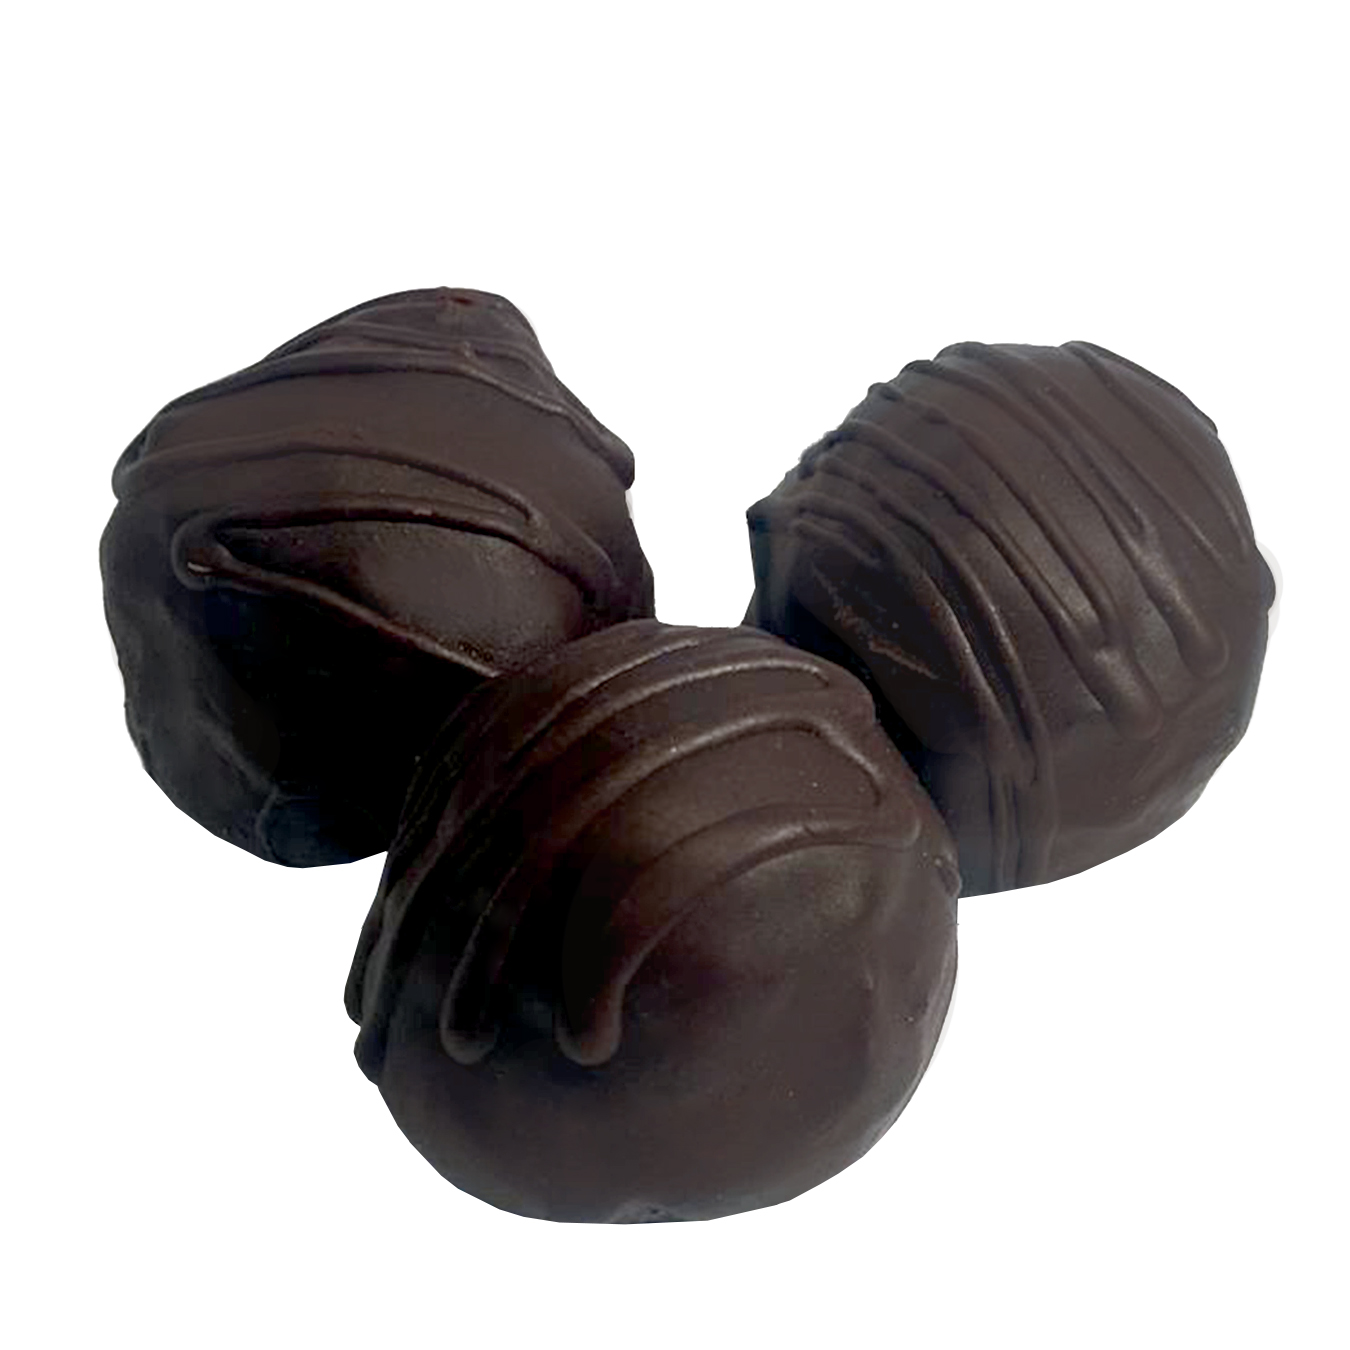 Chocolate candy Masters of chocolate grilled with hazelnuts and dates without sugar 20g